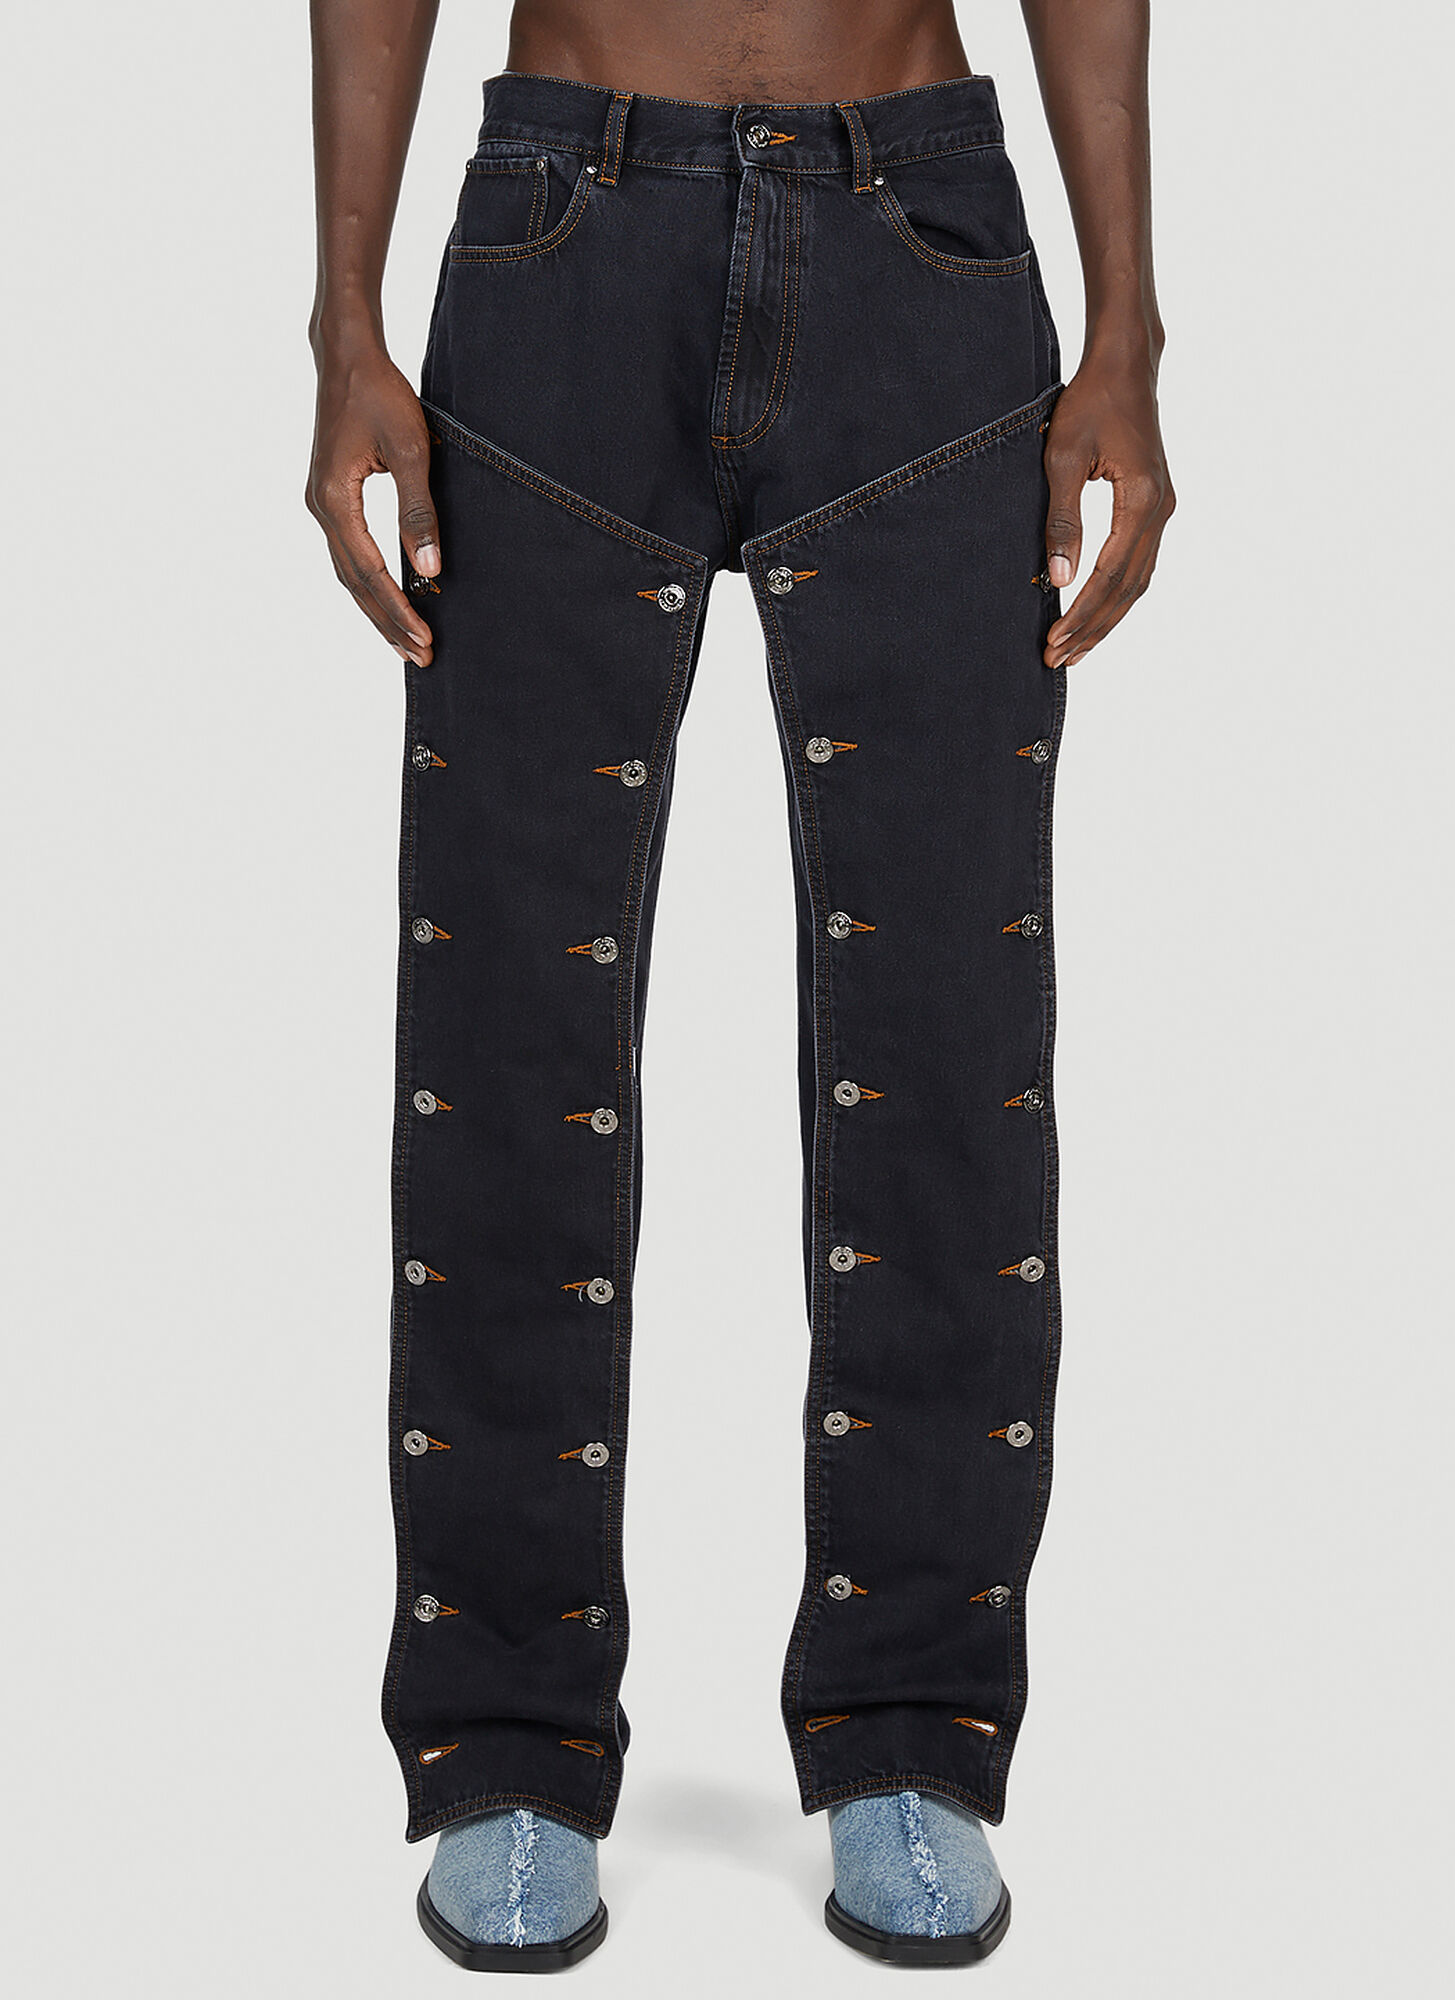 Y/PROJECT Y/PROJECT BUTTON PANEL JEANS MALE BLACKMALE